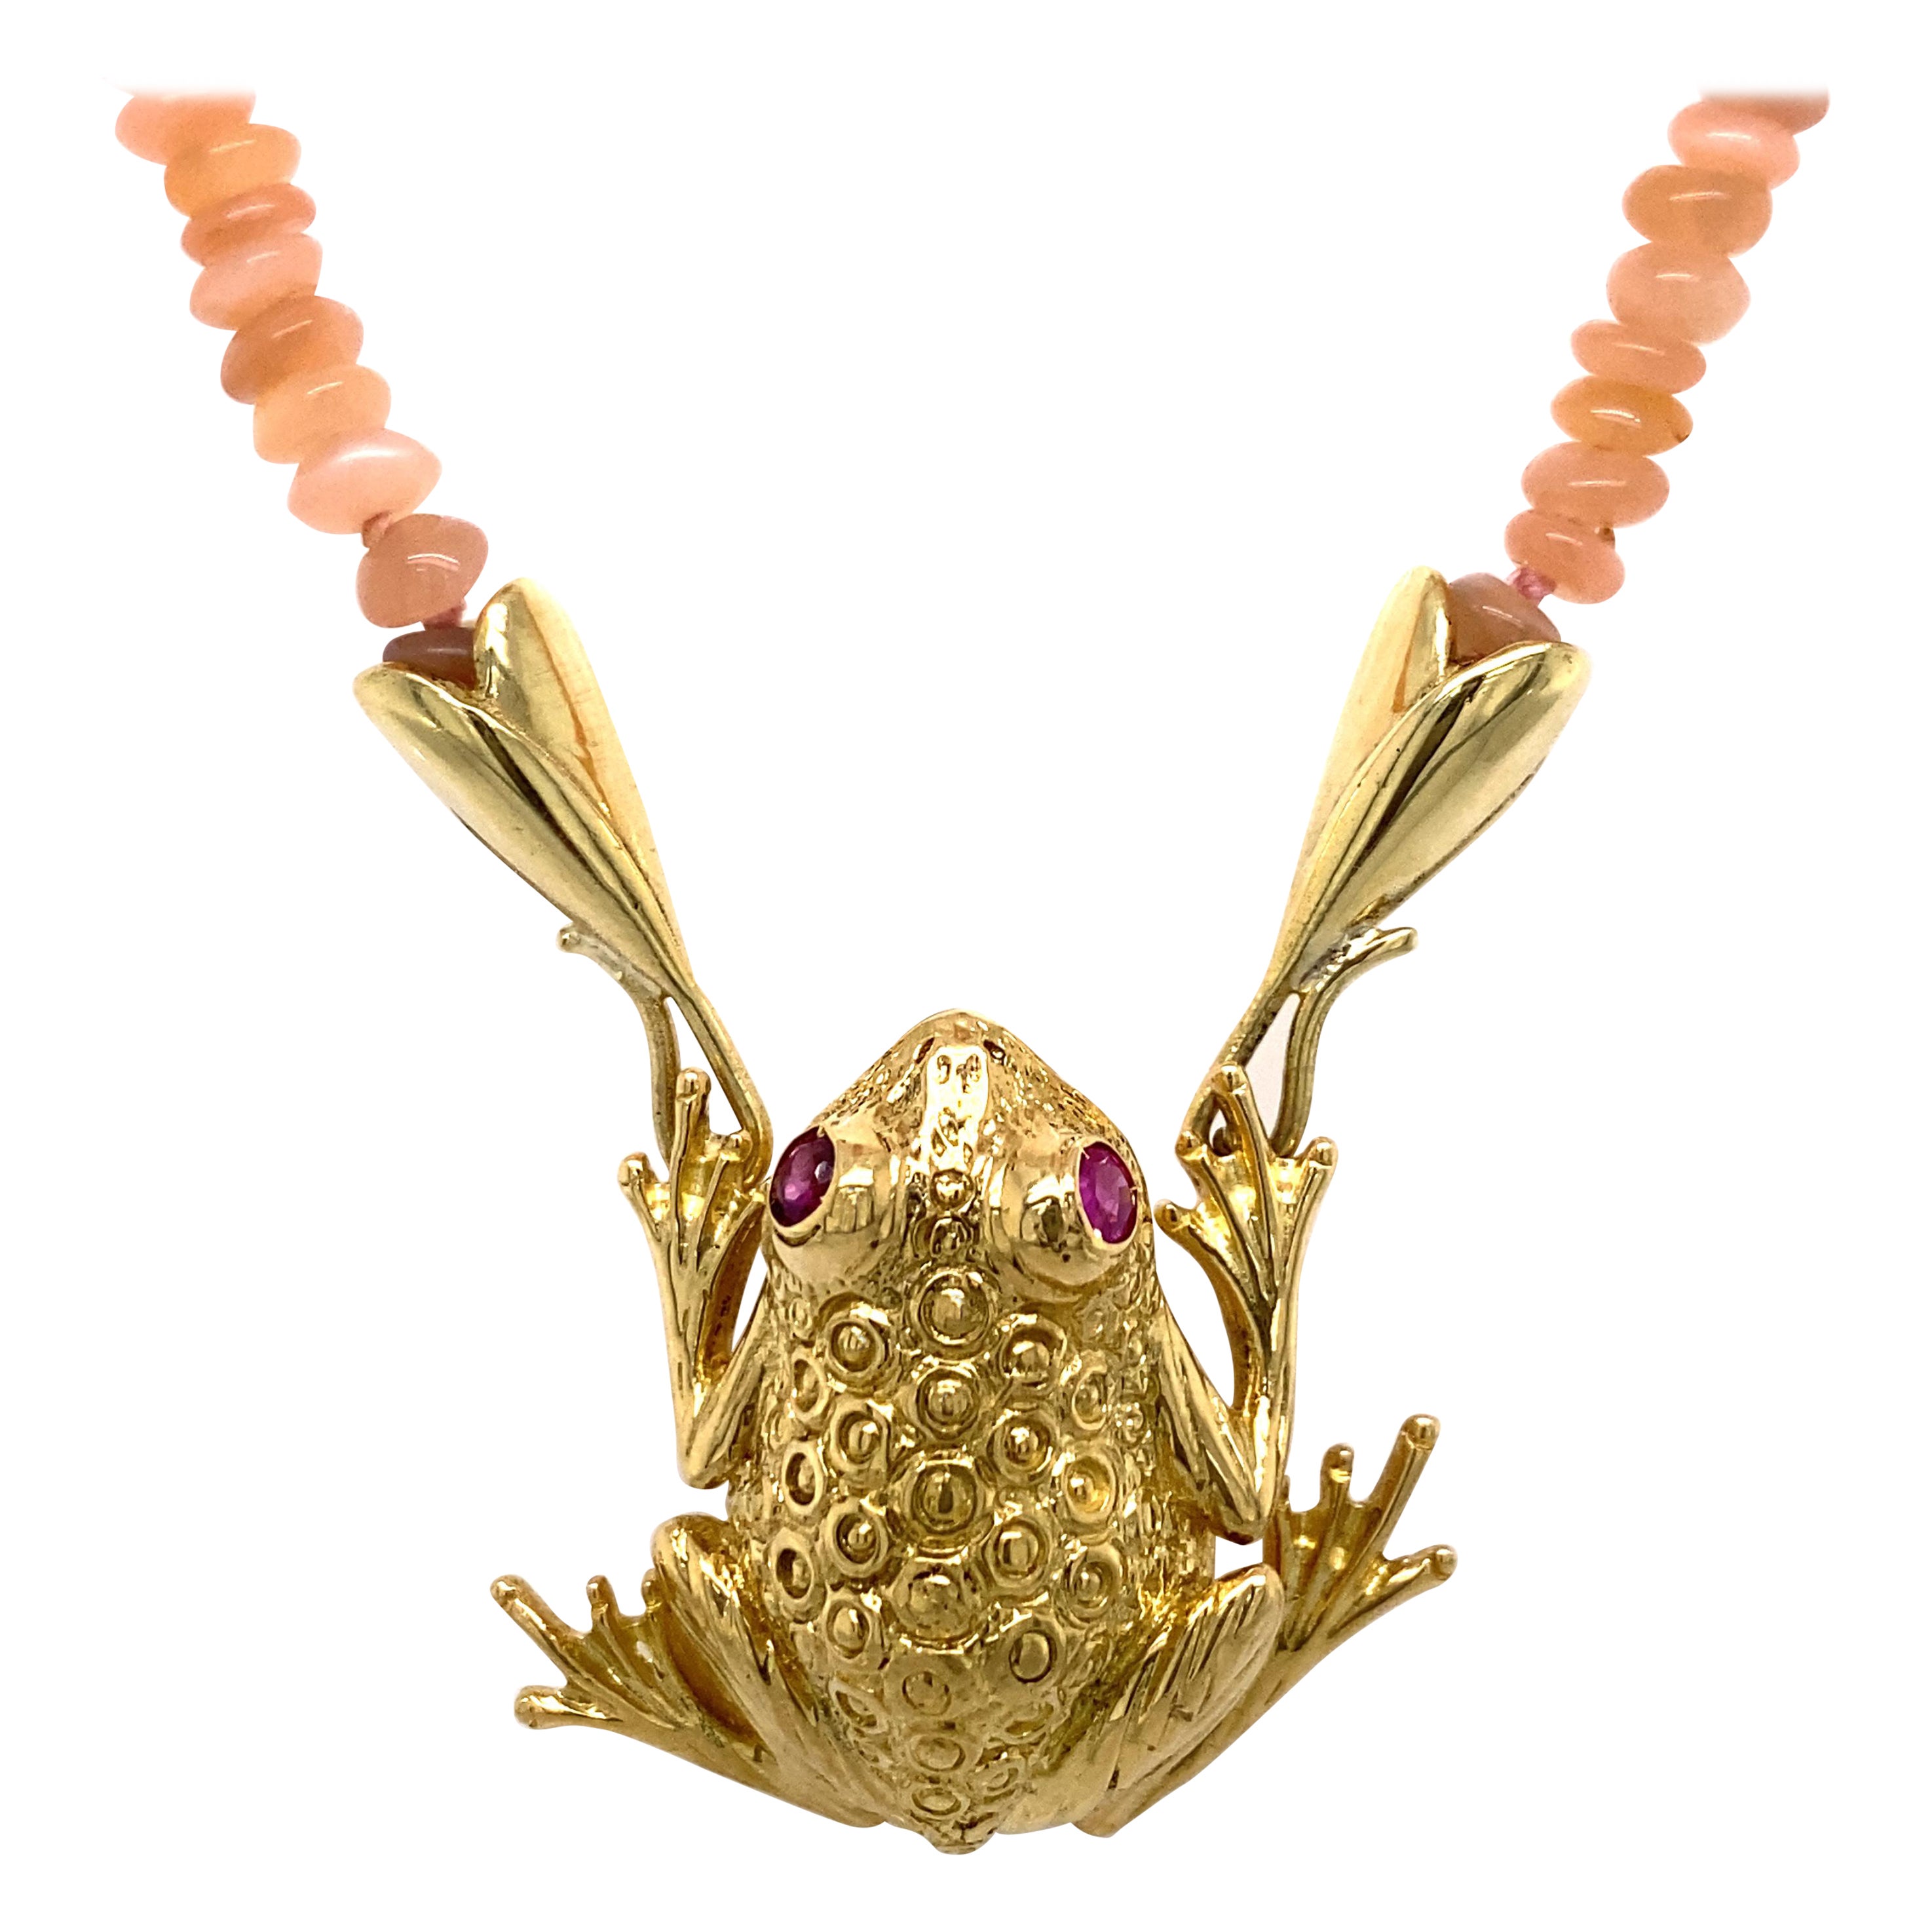 "Curly the Frog" Necklace in 18 Karat Gold with Ruby Eyes and Moonstone Chain